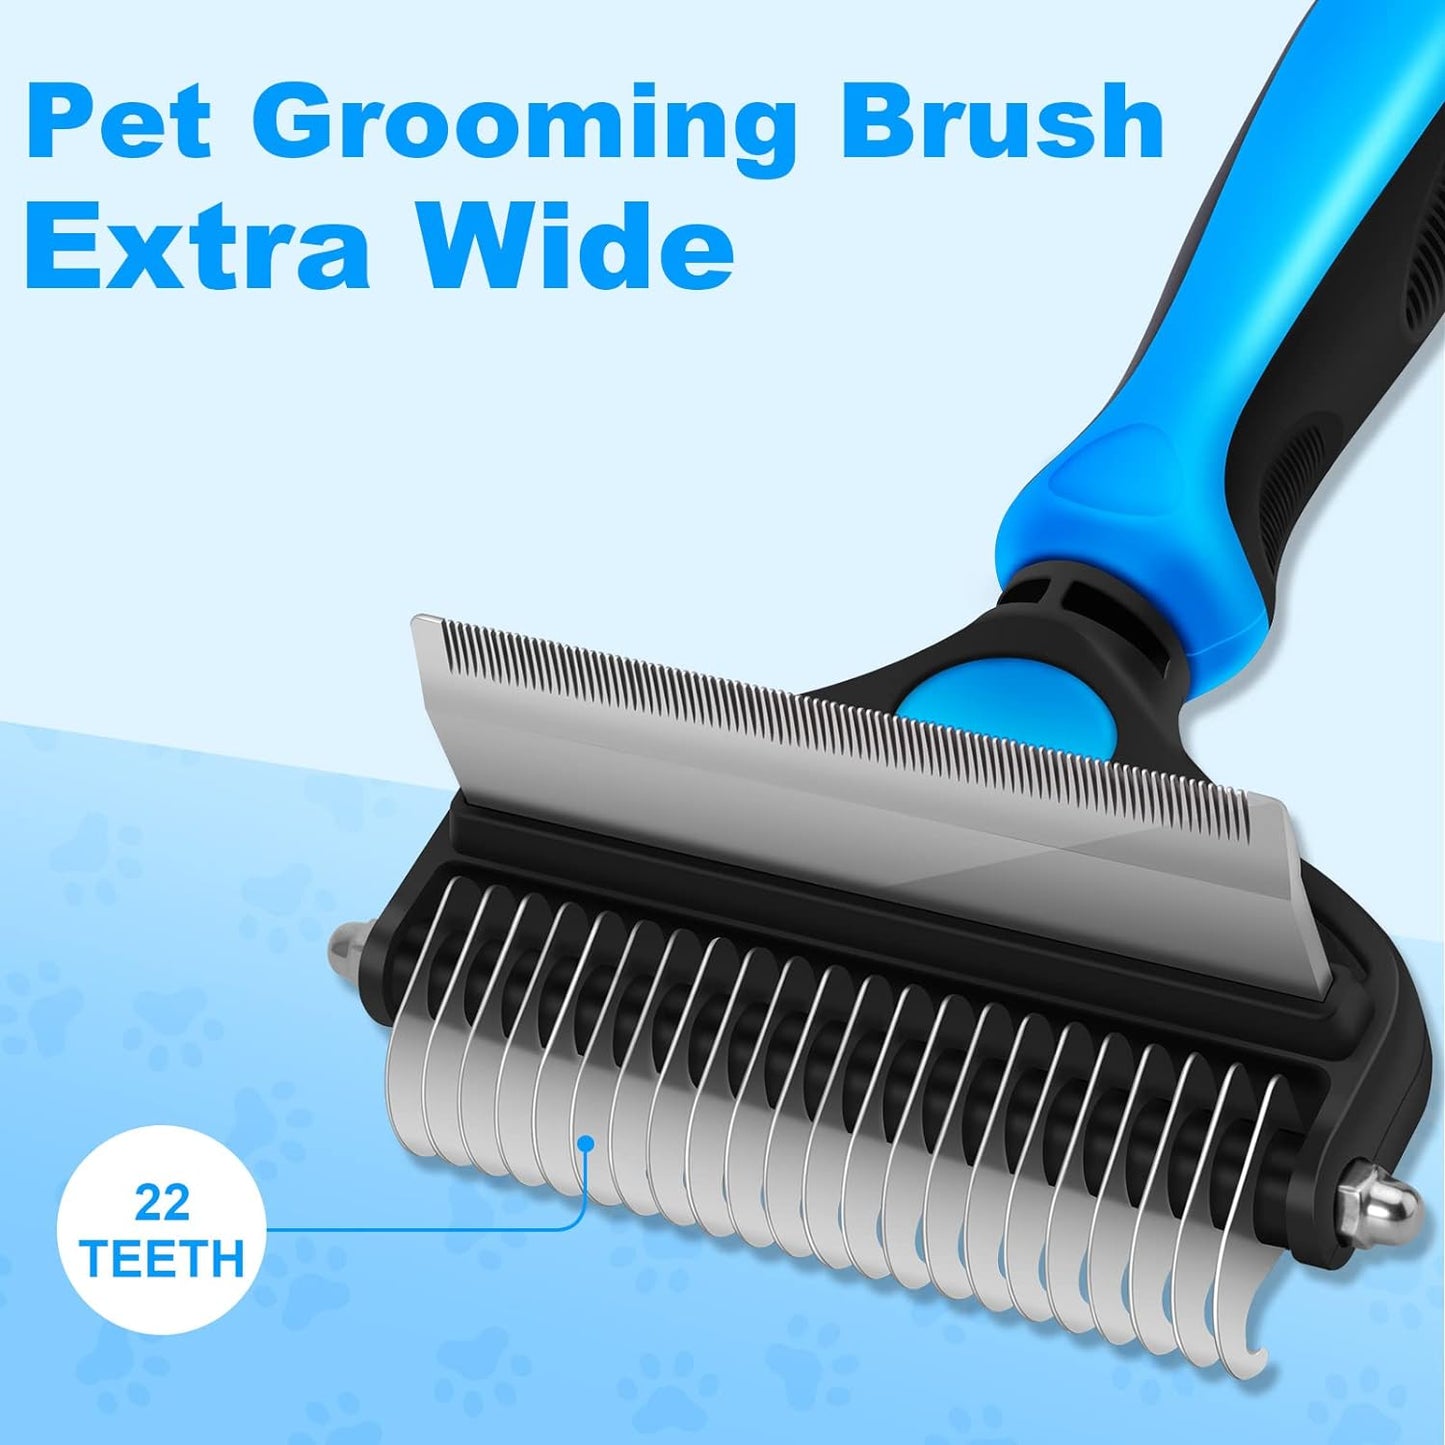 Dog Grooming Brush, 2 in 1 Dog Undercoat Rake for Small Dogs and Cats Shedding, Safe Dematting Comb Deshedding Tool for Pet Matted Hair (Small Blue)